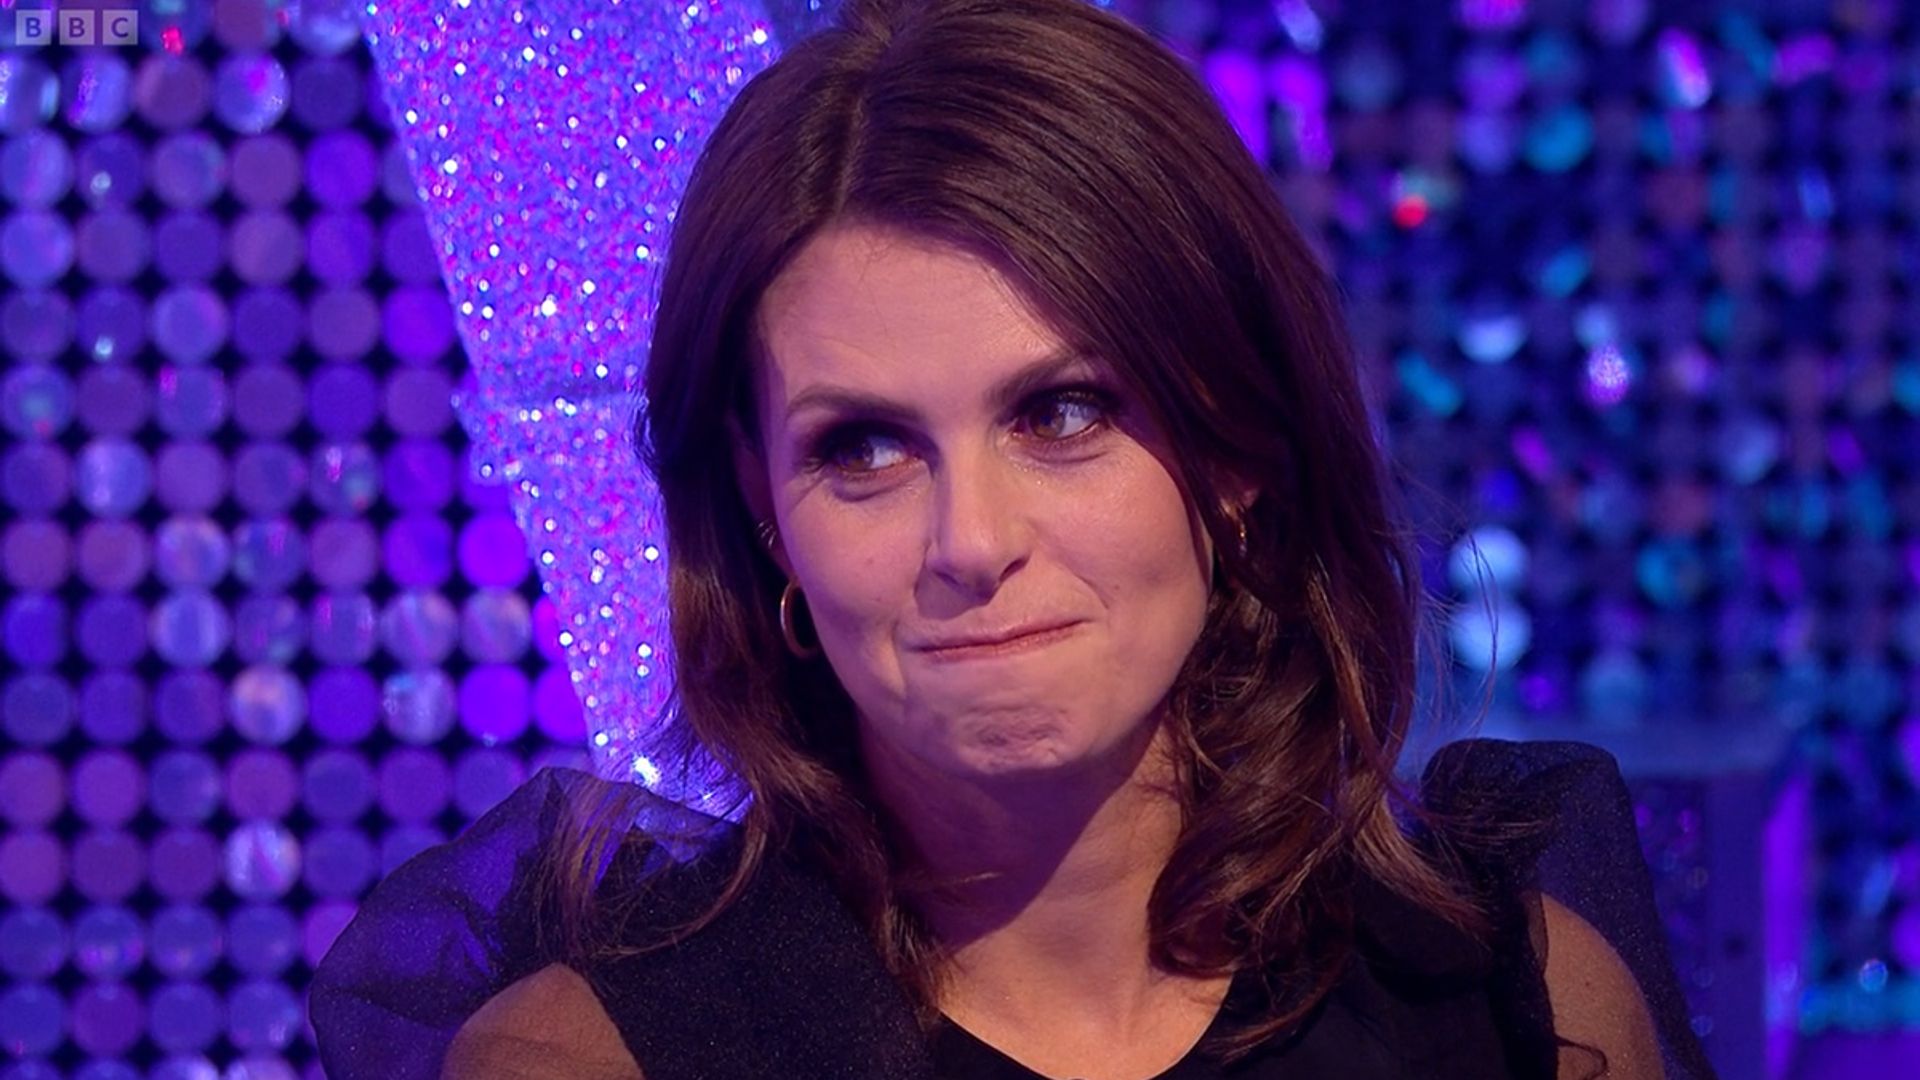 Strictly’s Ellie Taylor shares her 2022 winner during tearful exit interview which leaves fans ‘sobbing’